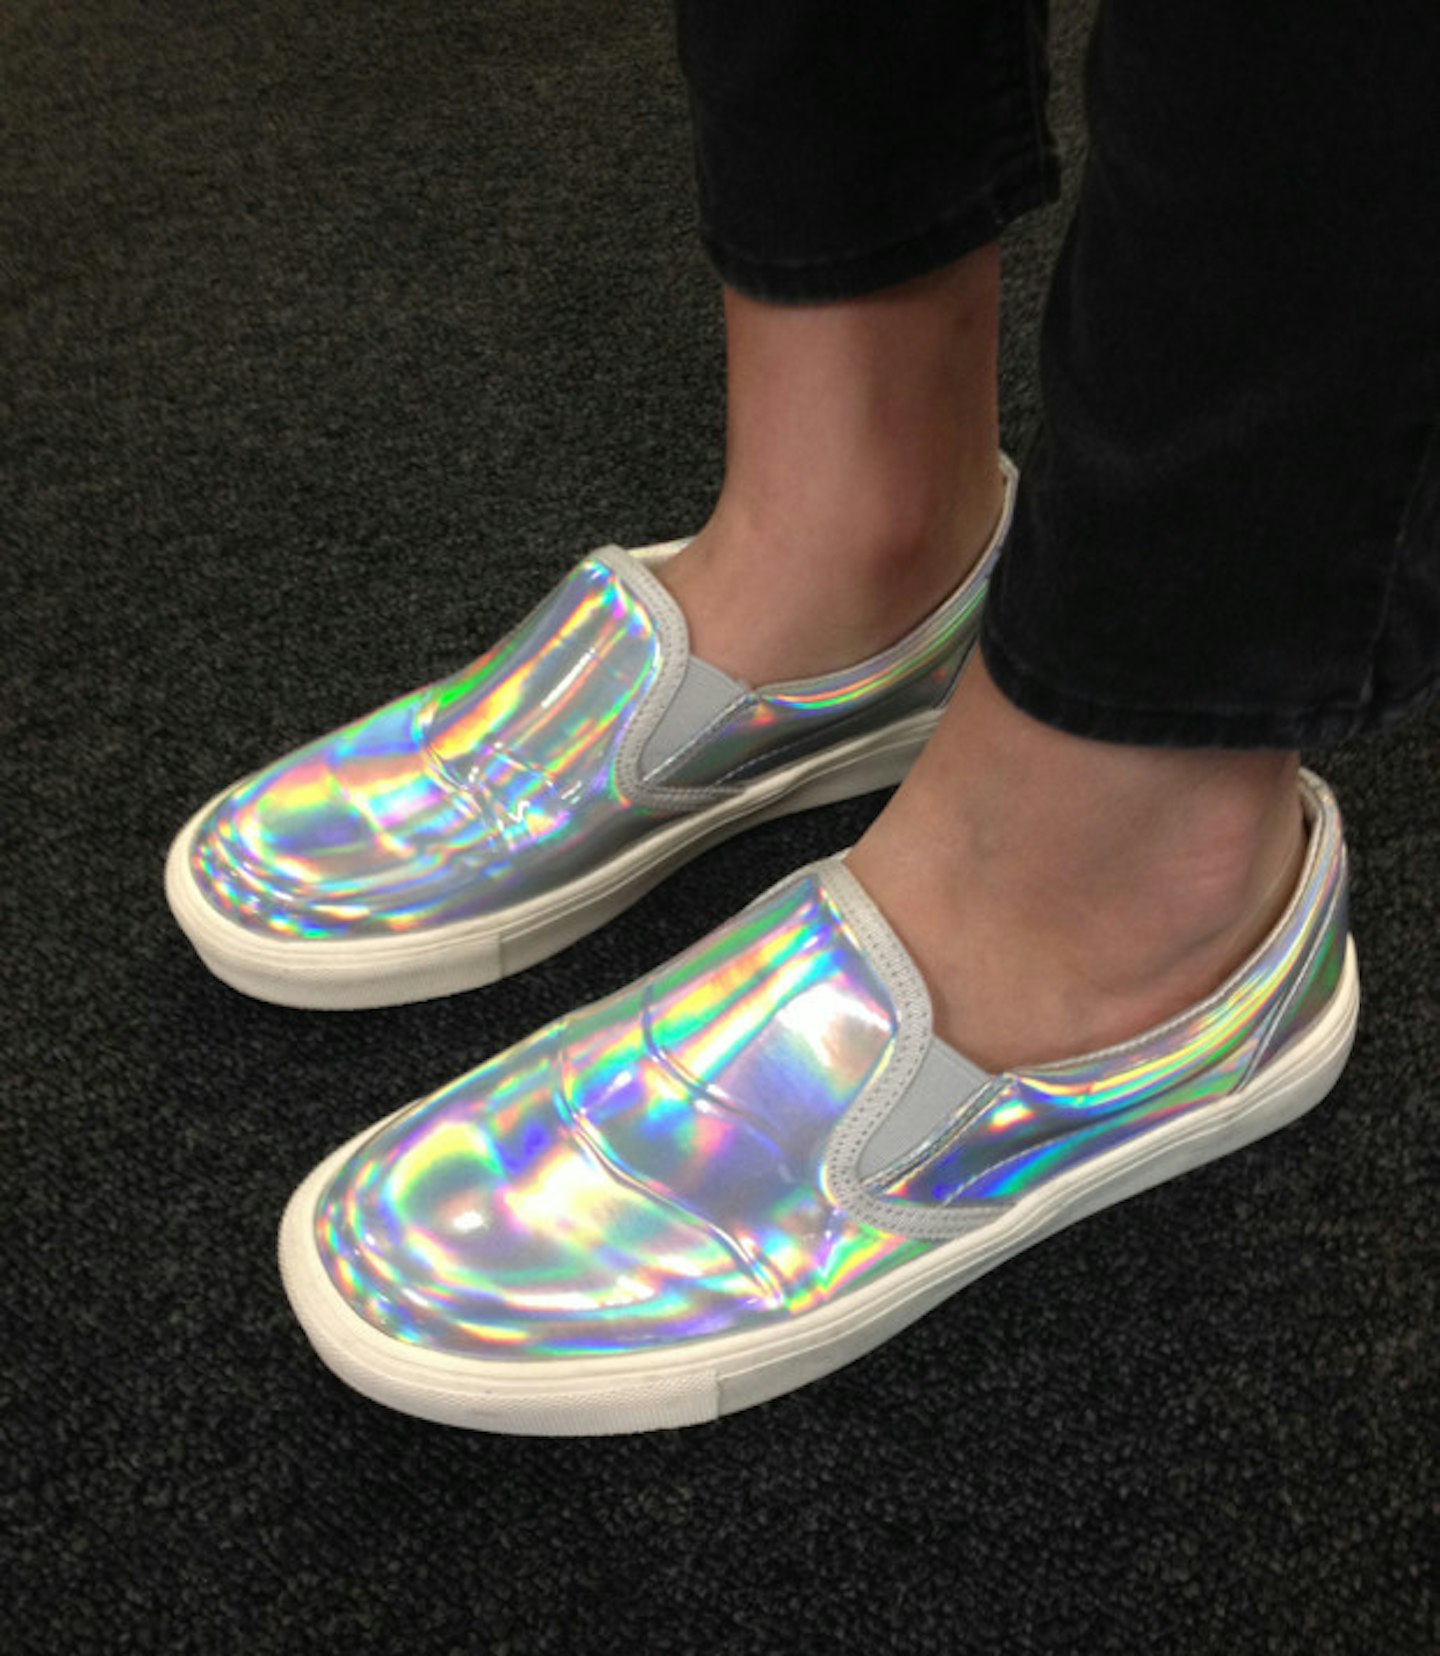 six-o-clock-shoes-holographic-sneakers-primark